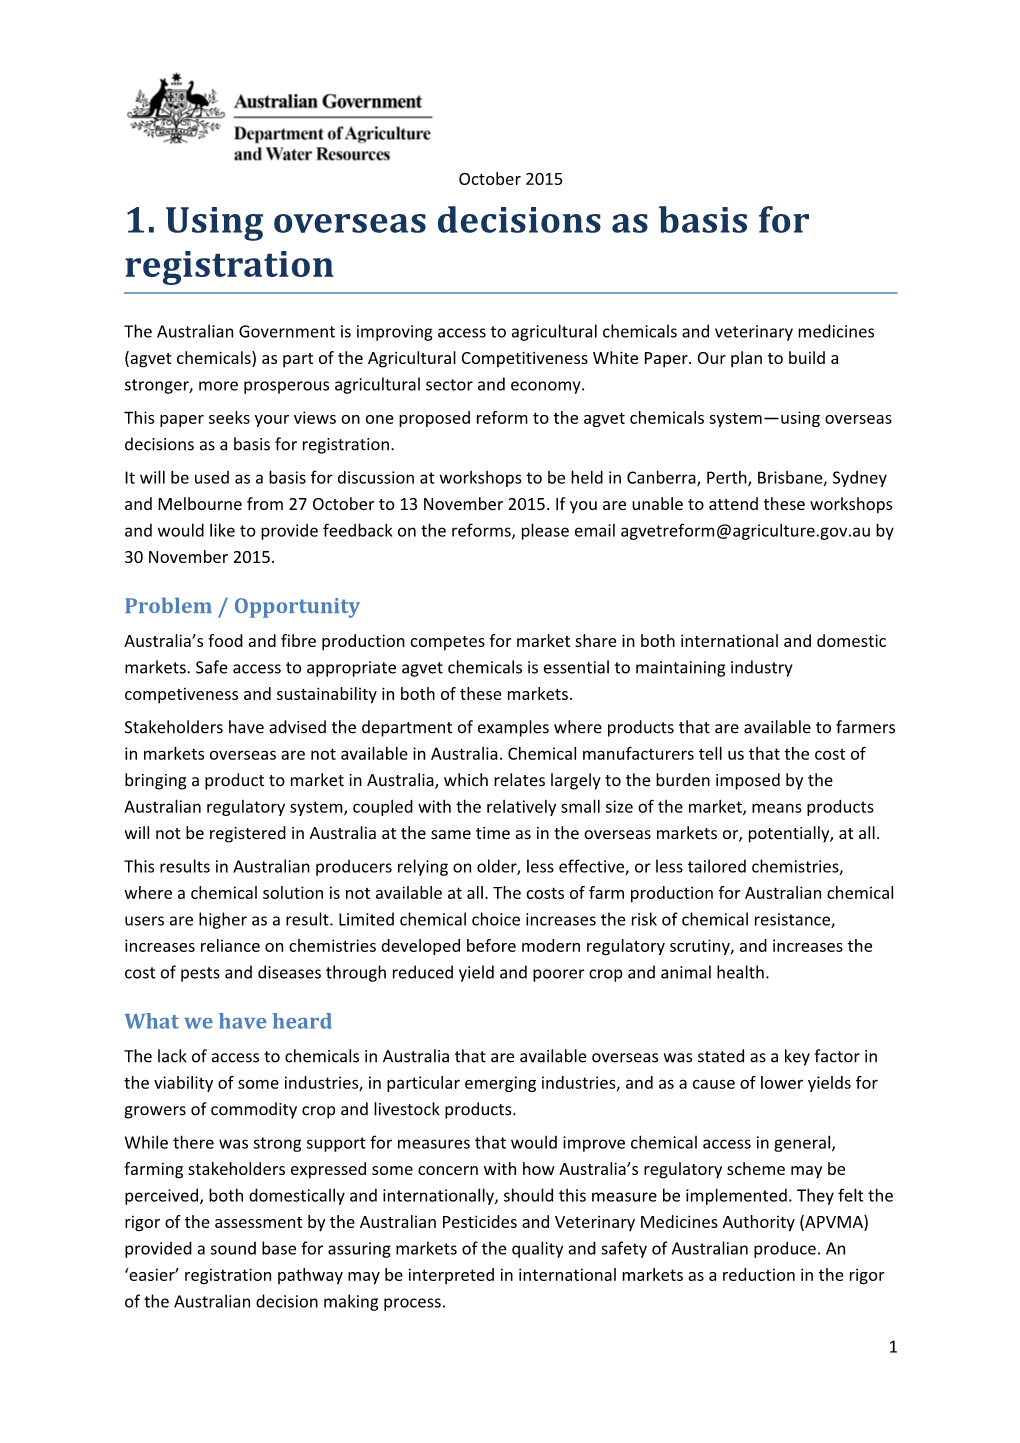 1. Using Overseas Decisions As Basis for Registration